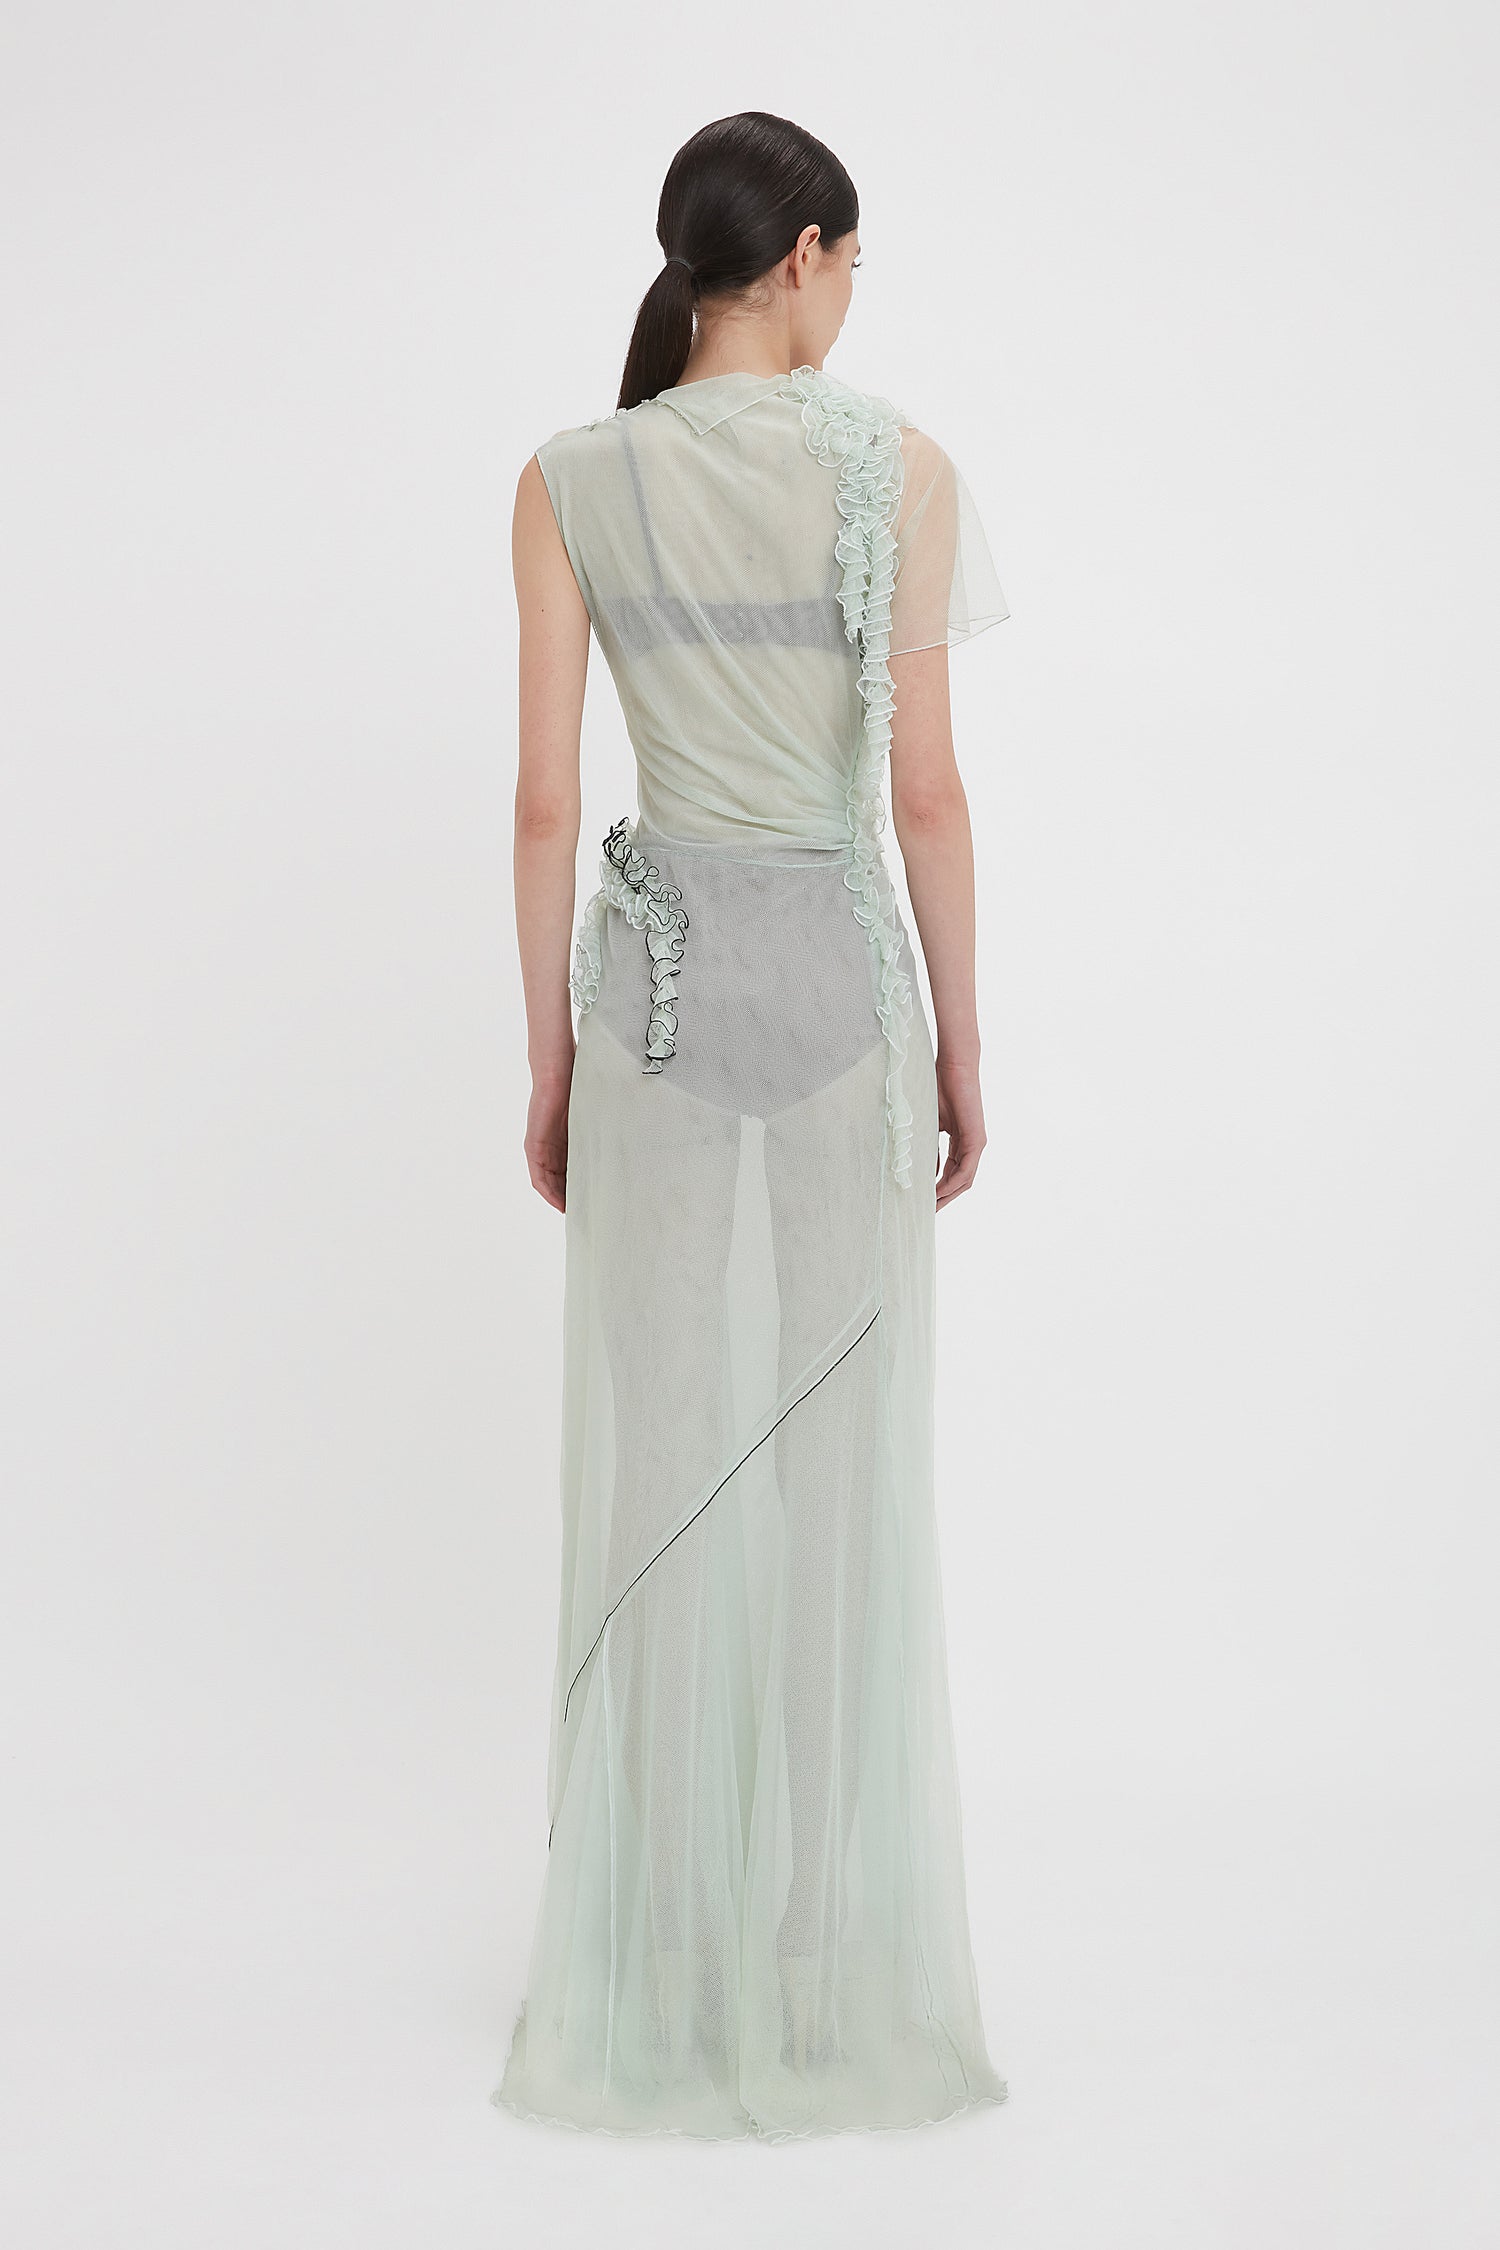 A woman with dark hair stands facing away, wearing the Victoria Beckham Gathered Tulle Detail Floor-Length Dress In Jade, adorned with floral embellishments and an asymmetrical hemline.